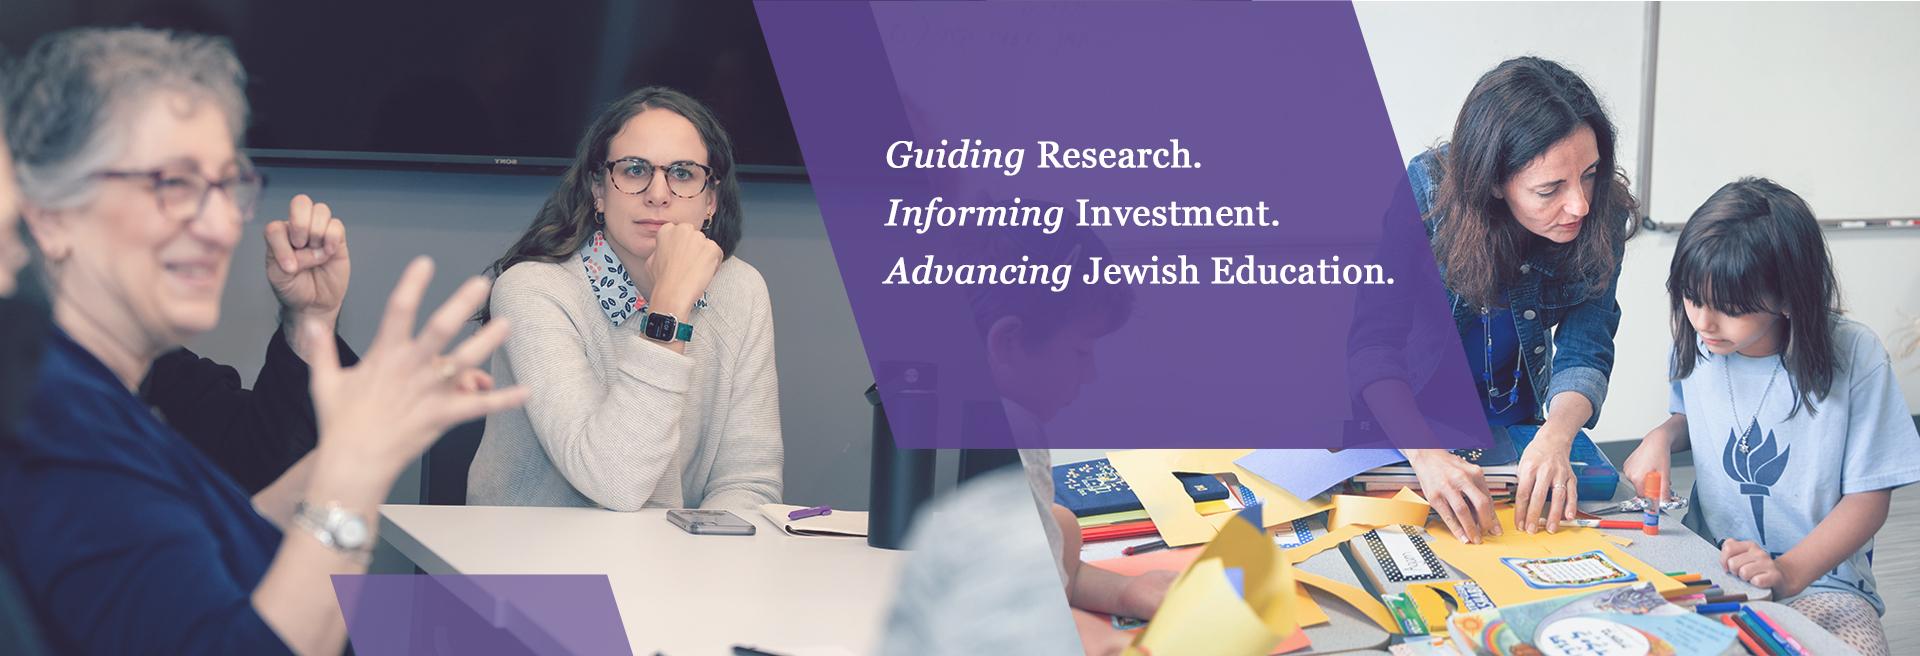 Decorative header that includes two photos. The first photo is of two Jewish professionals speaking at a table. The second is of a teacher helping a student. A purple overlay reads "Guiding Research. Informing Investment. Advancing Jewish Education."